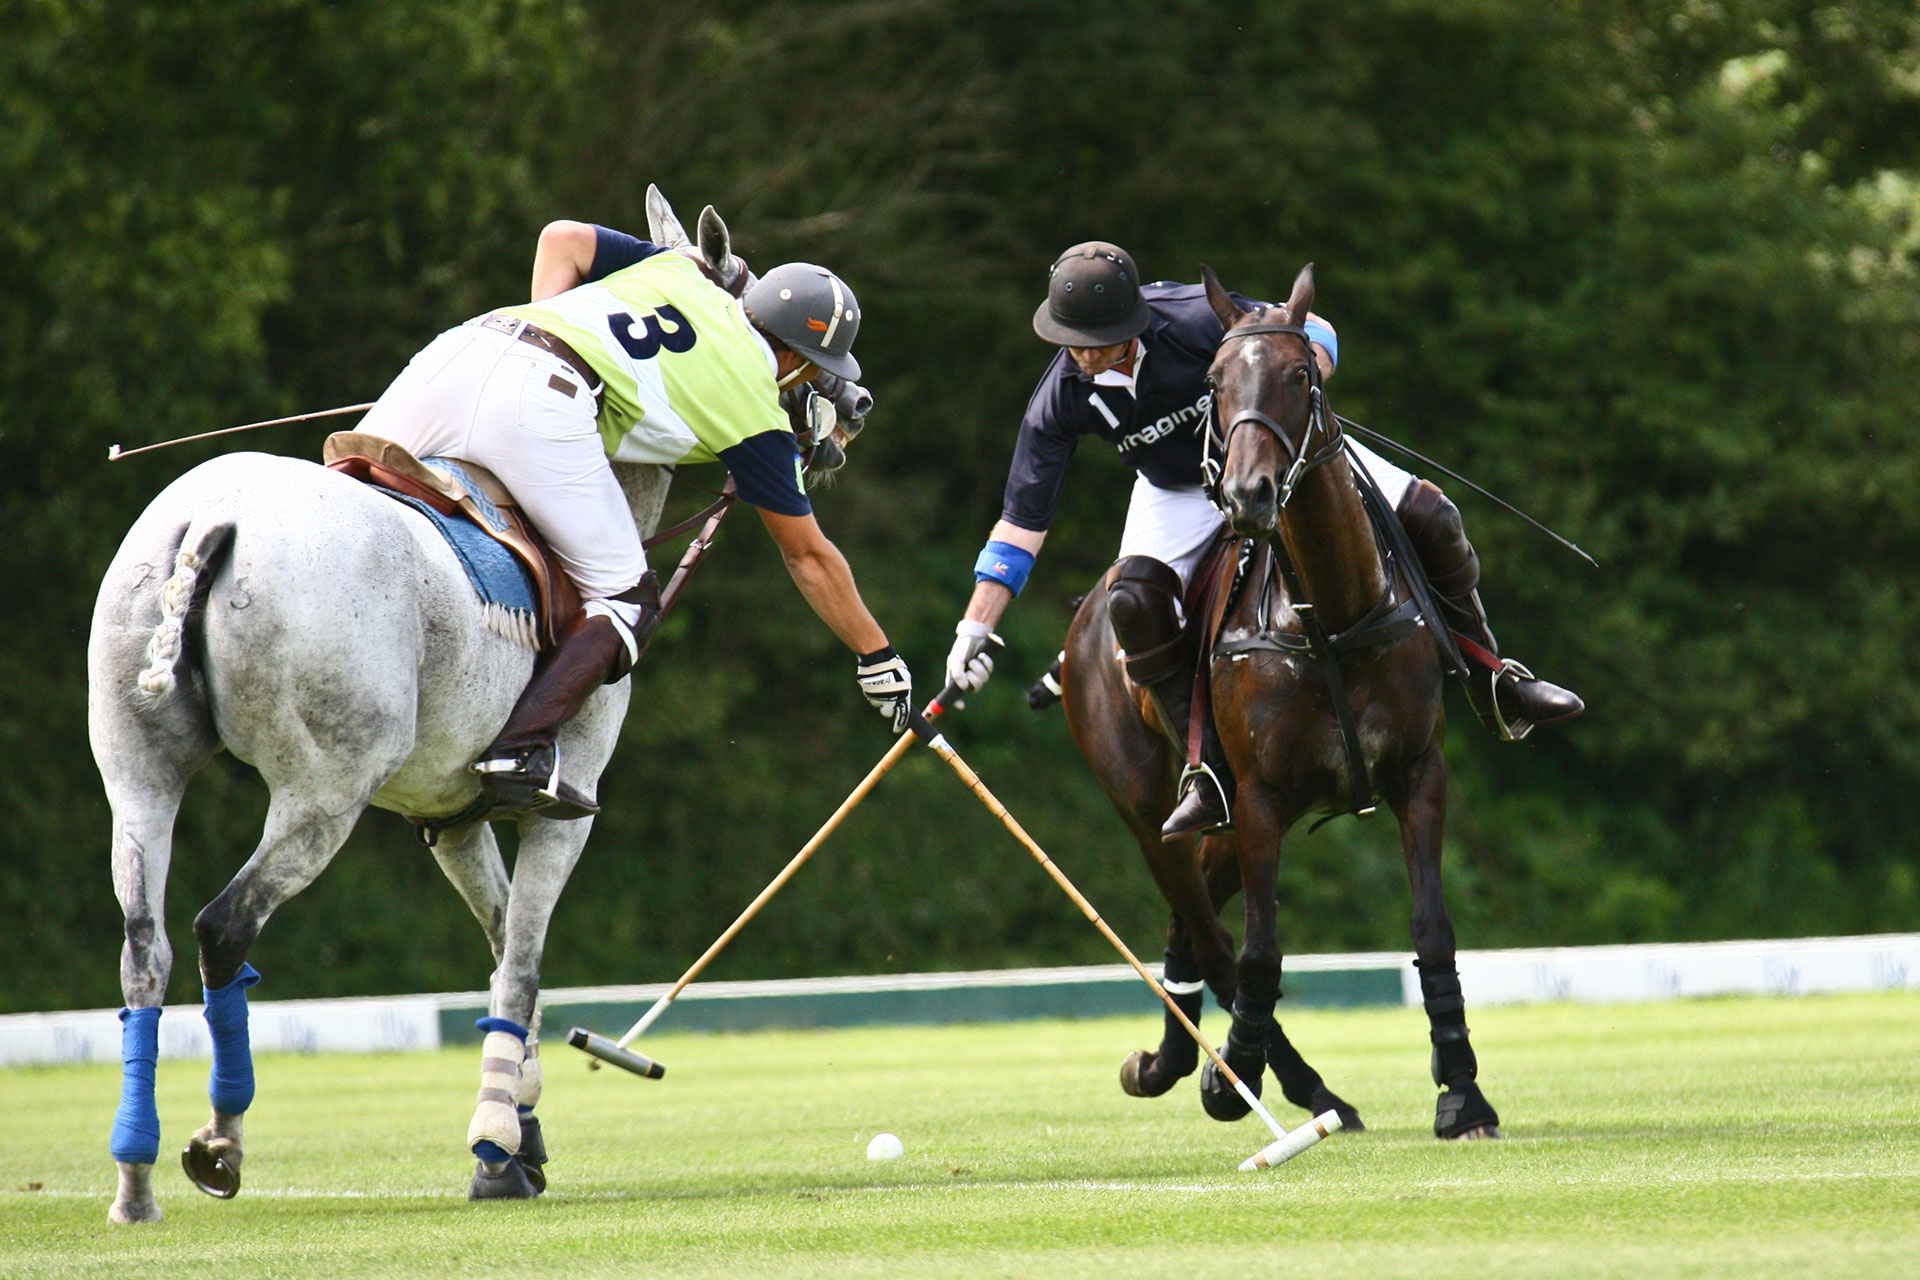 Polo action at Hurtwood Park